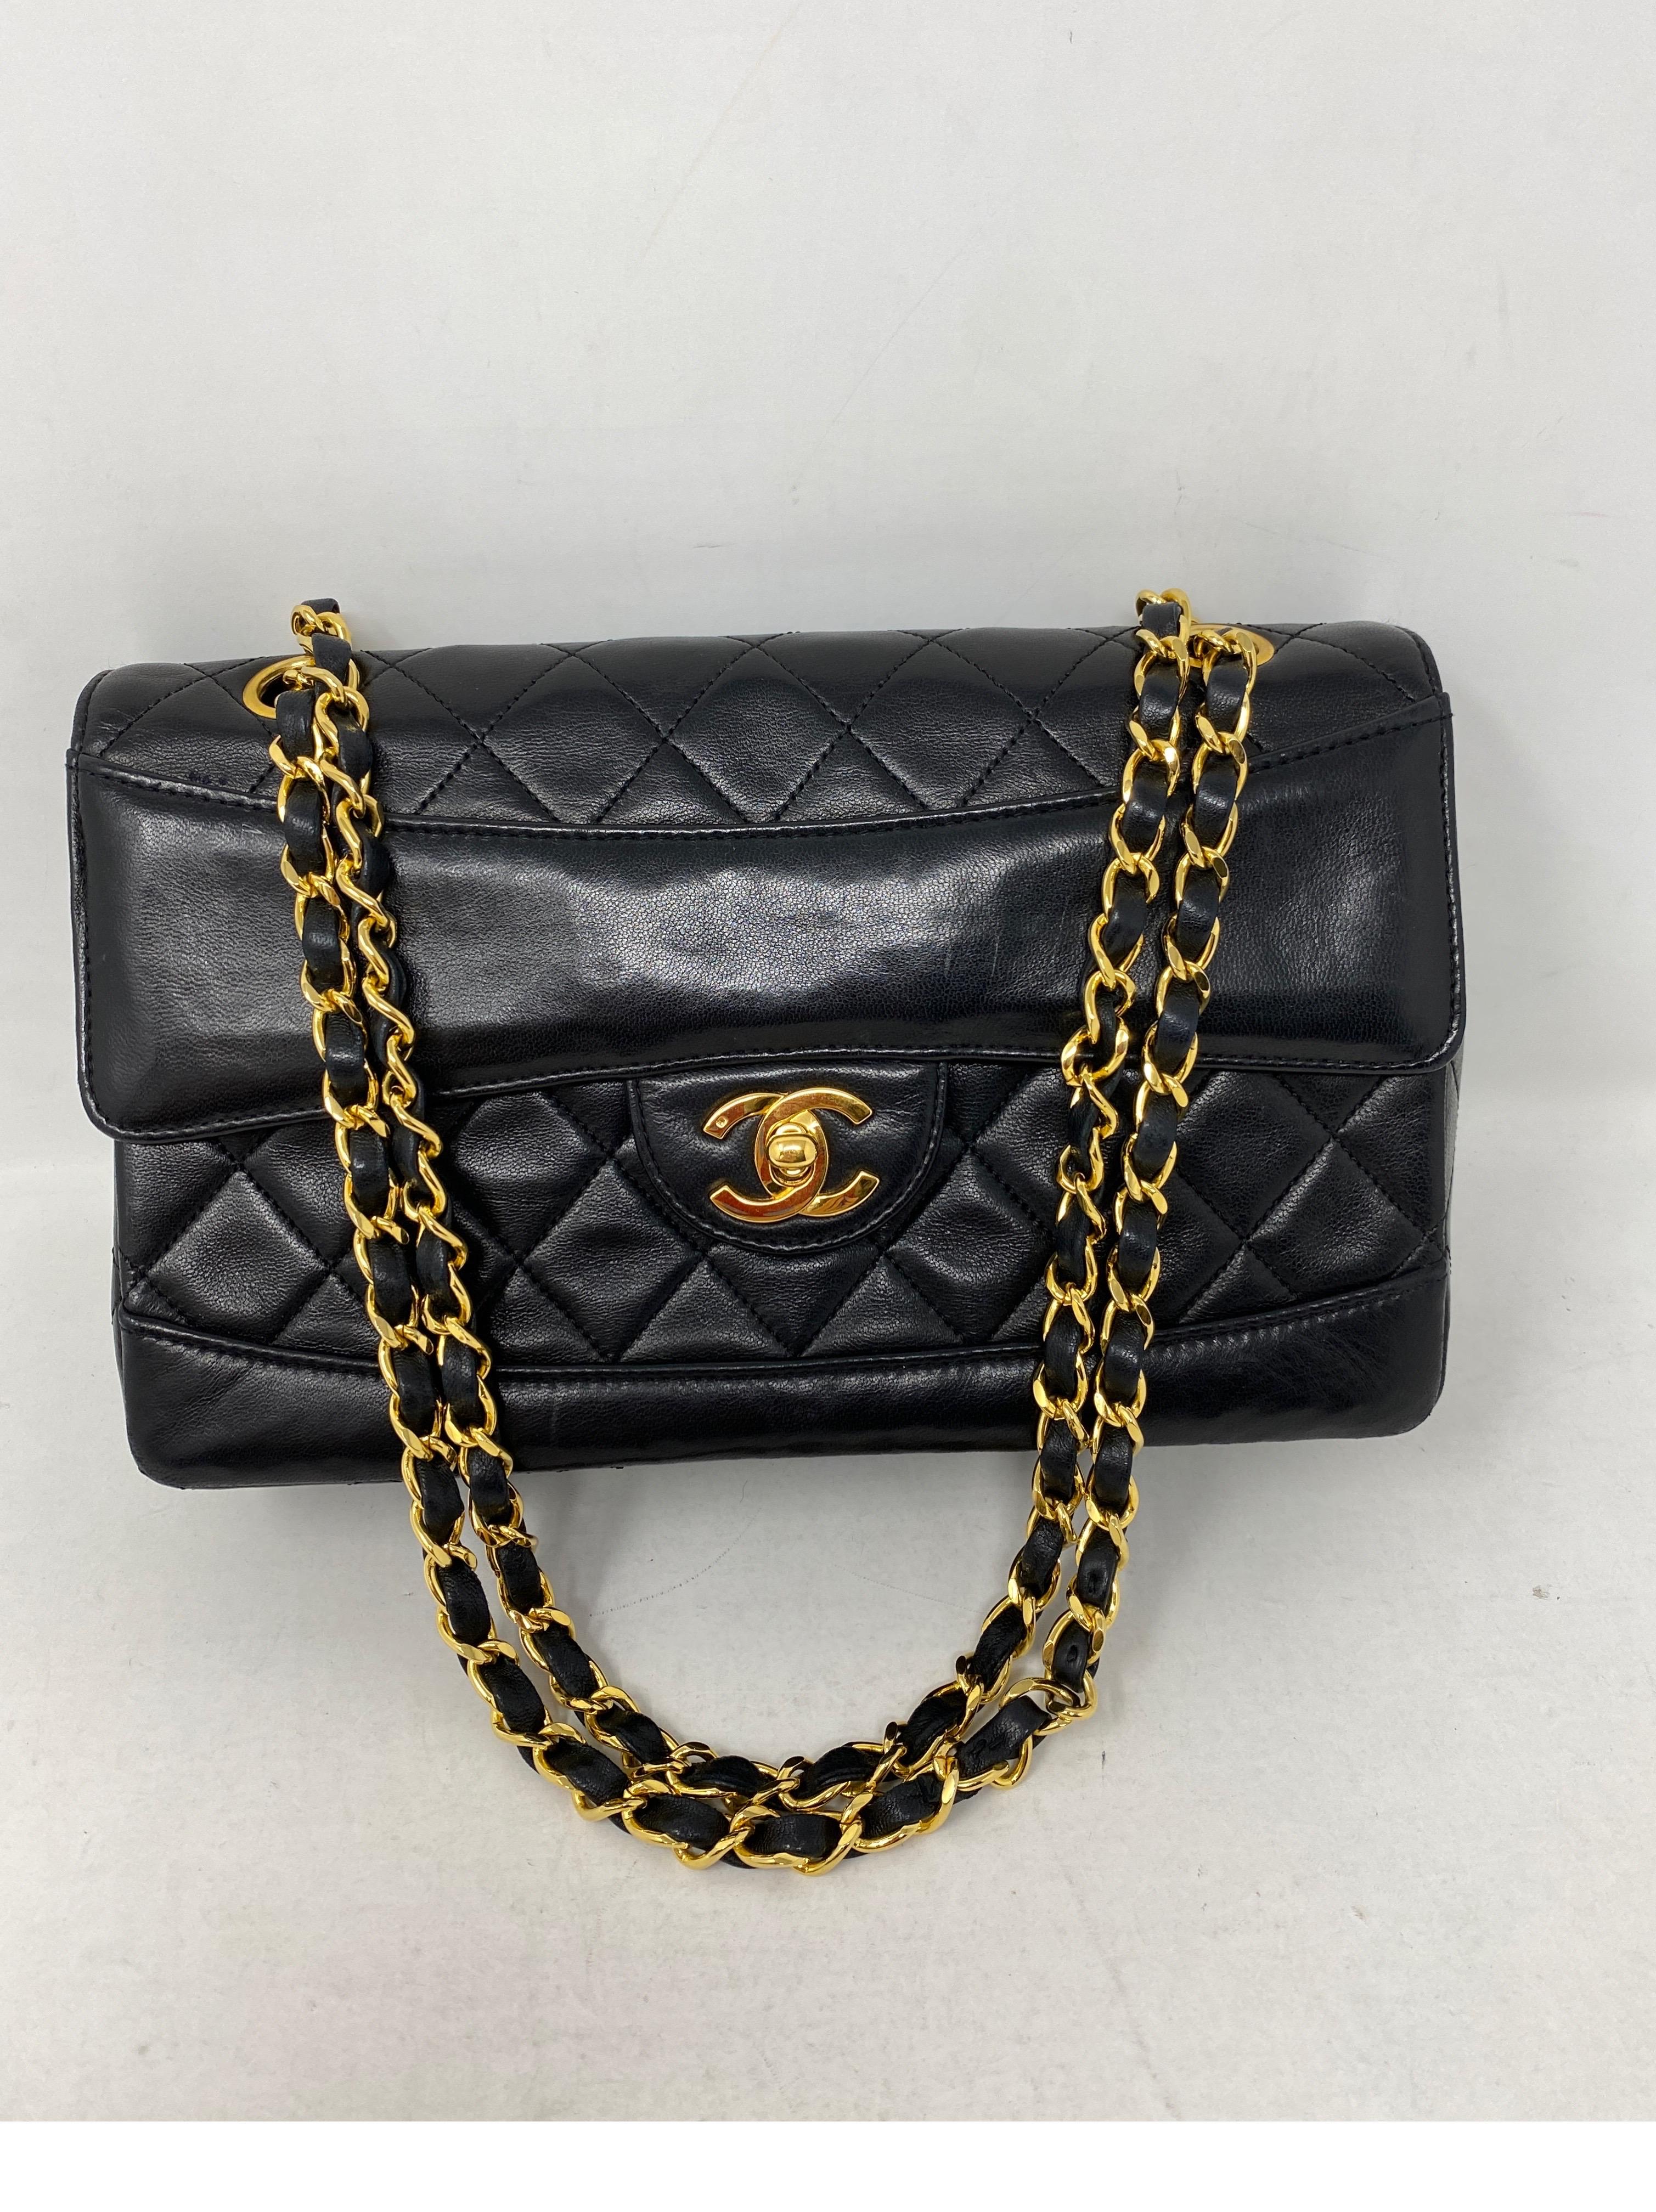 Women's or Men's Chanel Black Classic Flap with Wallet Bag 